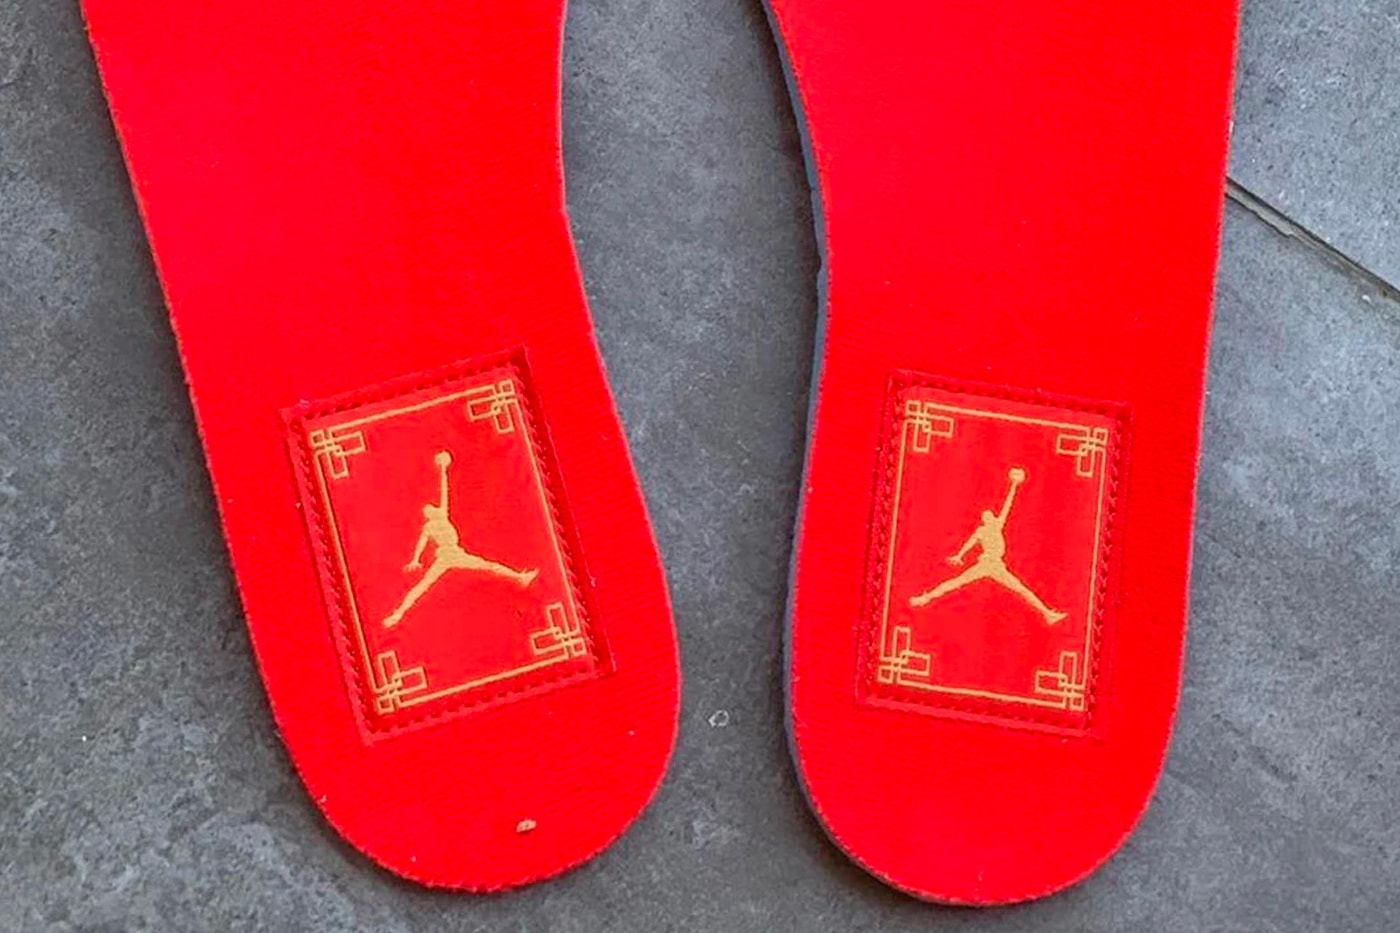 Nike Air Jordan 1 Low OG Lunar New "Year of the Rabbit" Limited 5000 Pairs Release Date Info